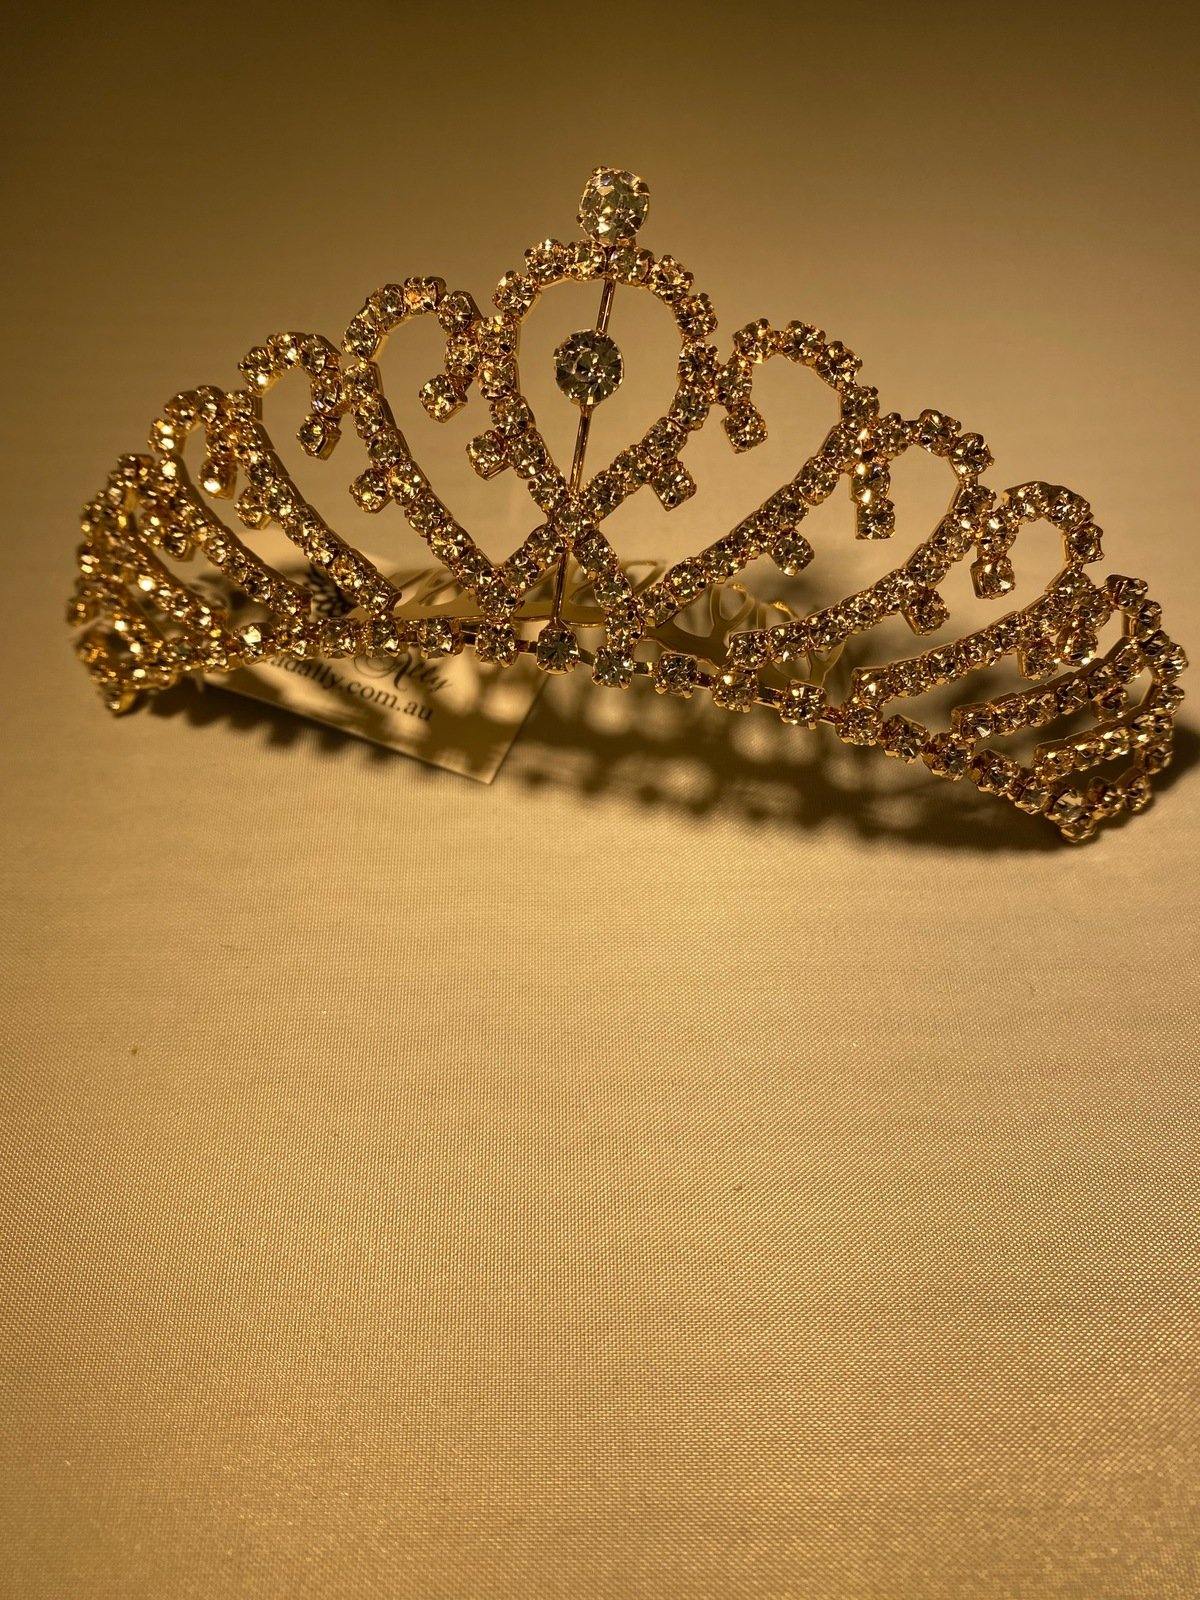 This gold tiara with overlapping heart design and sparkling crystals makes it a stunning accessory to any attire, with slide comb attached.